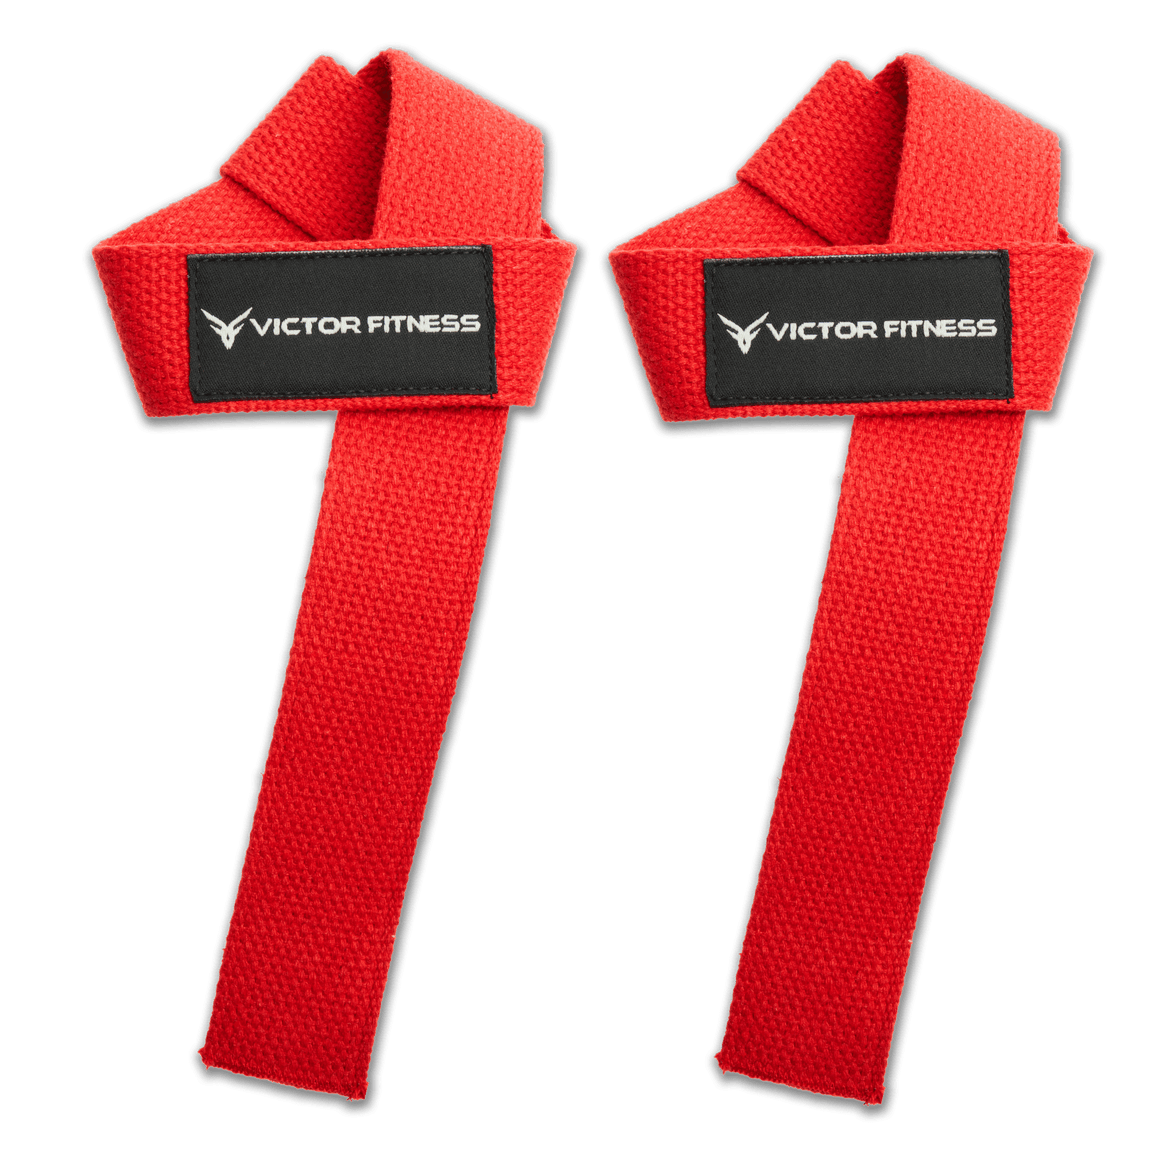 24 Weightlifting Wrist Straps – Victor Fitness